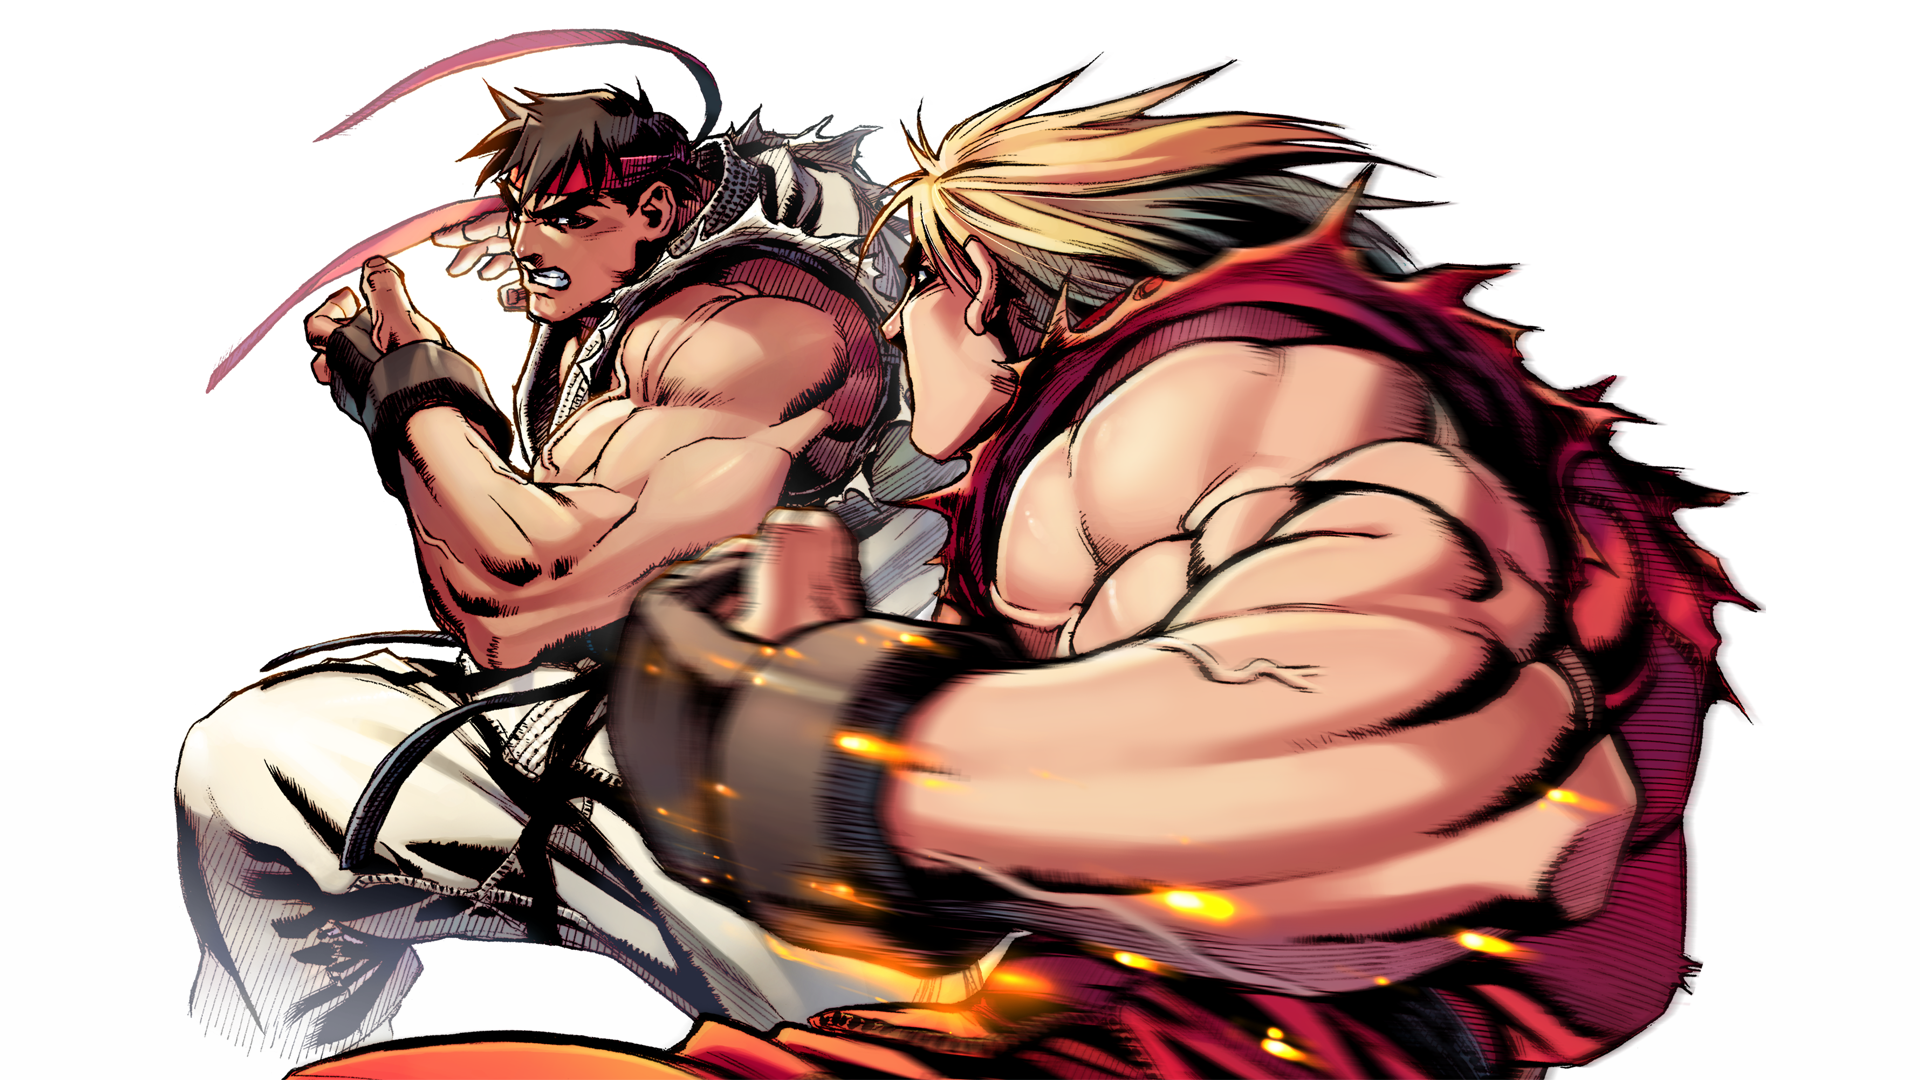 sf2turbo-revival-ryu-and-ken-art-by-edayan.png